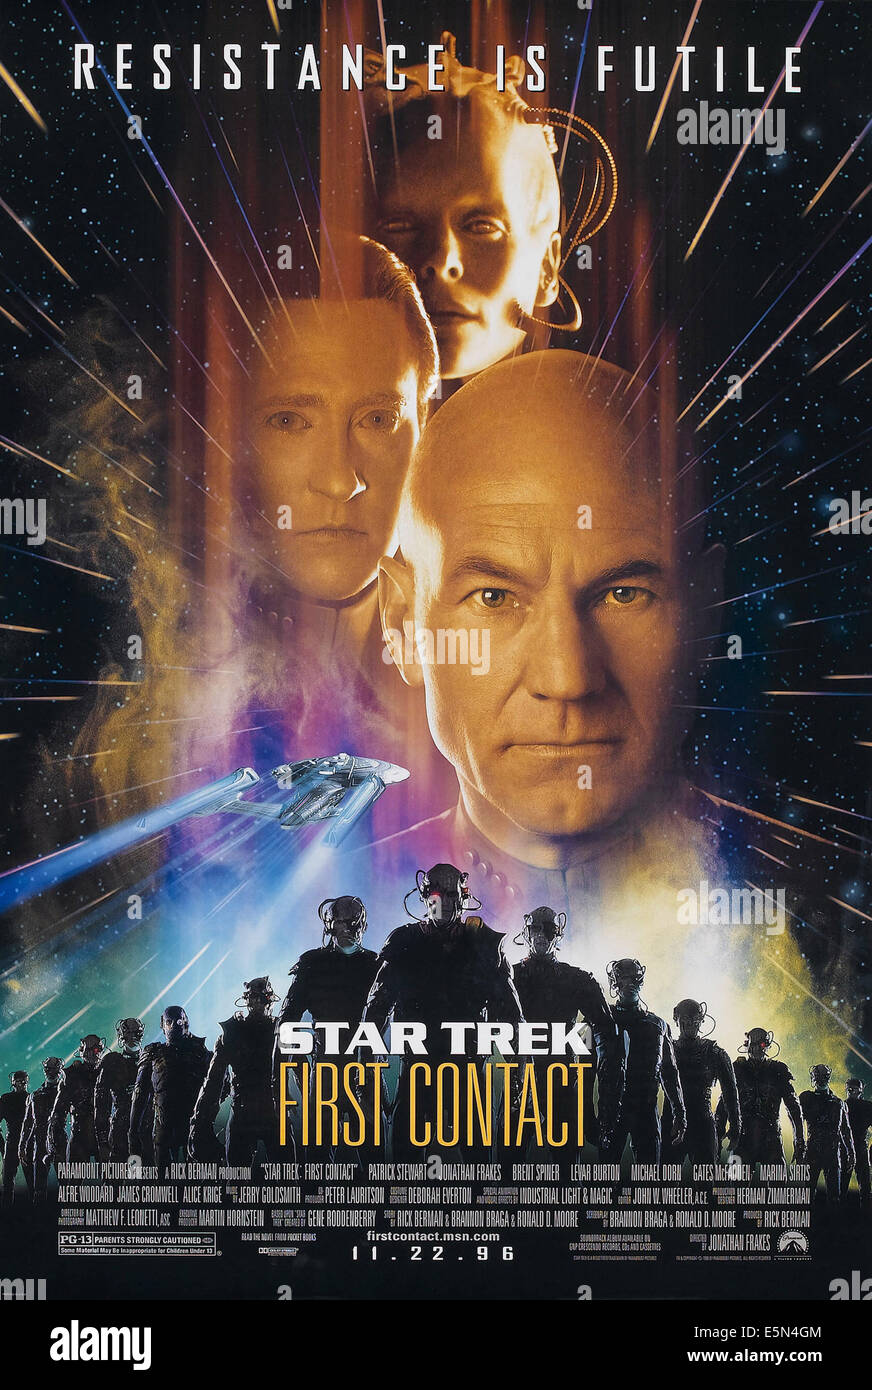 STAR TREK: FIRST CONTACT, US advance poster art, from top: Alice Krige, Brent Spiner, Patrick Stewart, 1996, ©Paramount Stock Photo